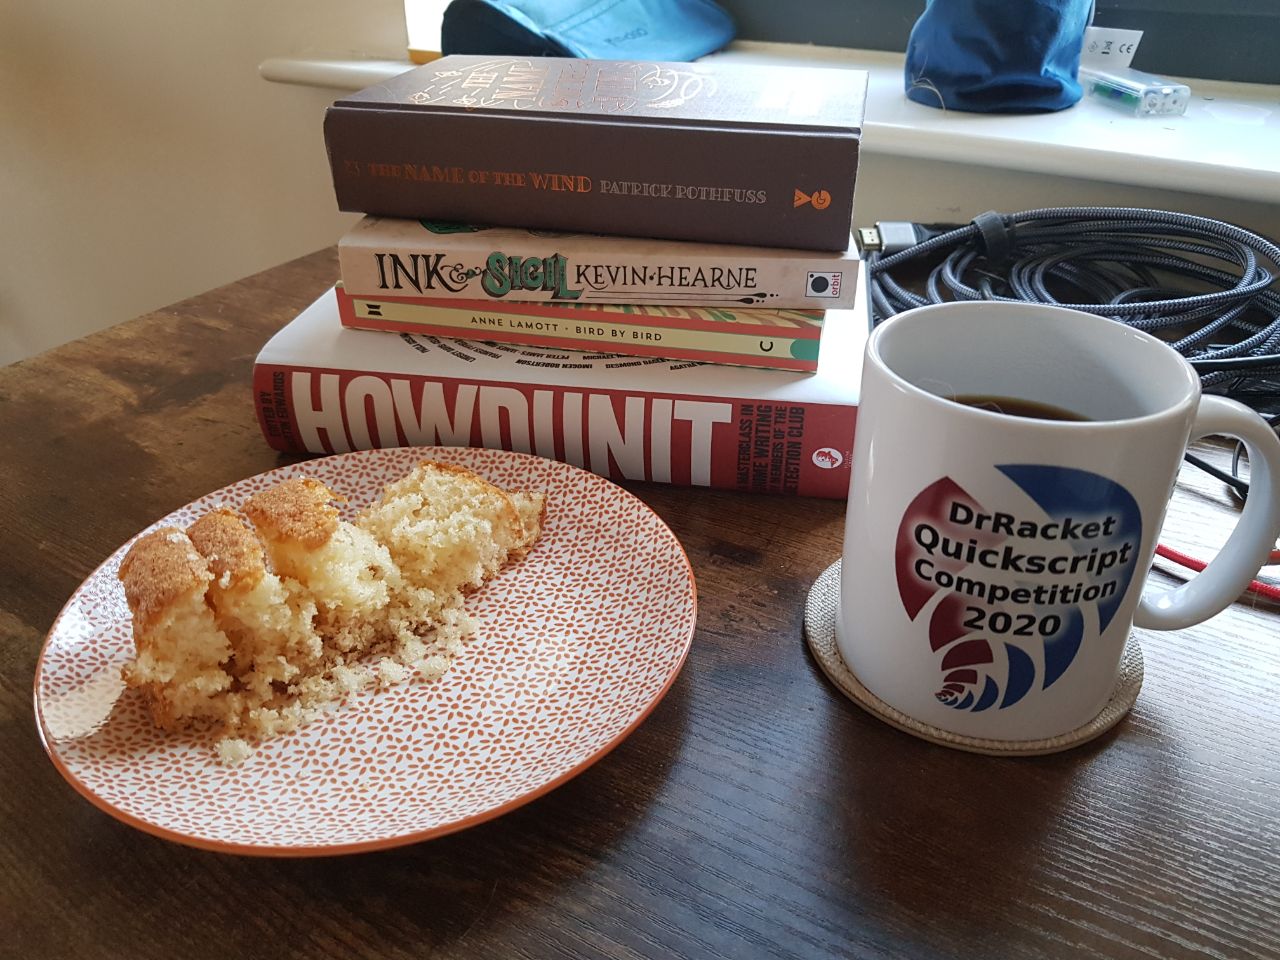 A good way to start the day: coffee, cake, and books.